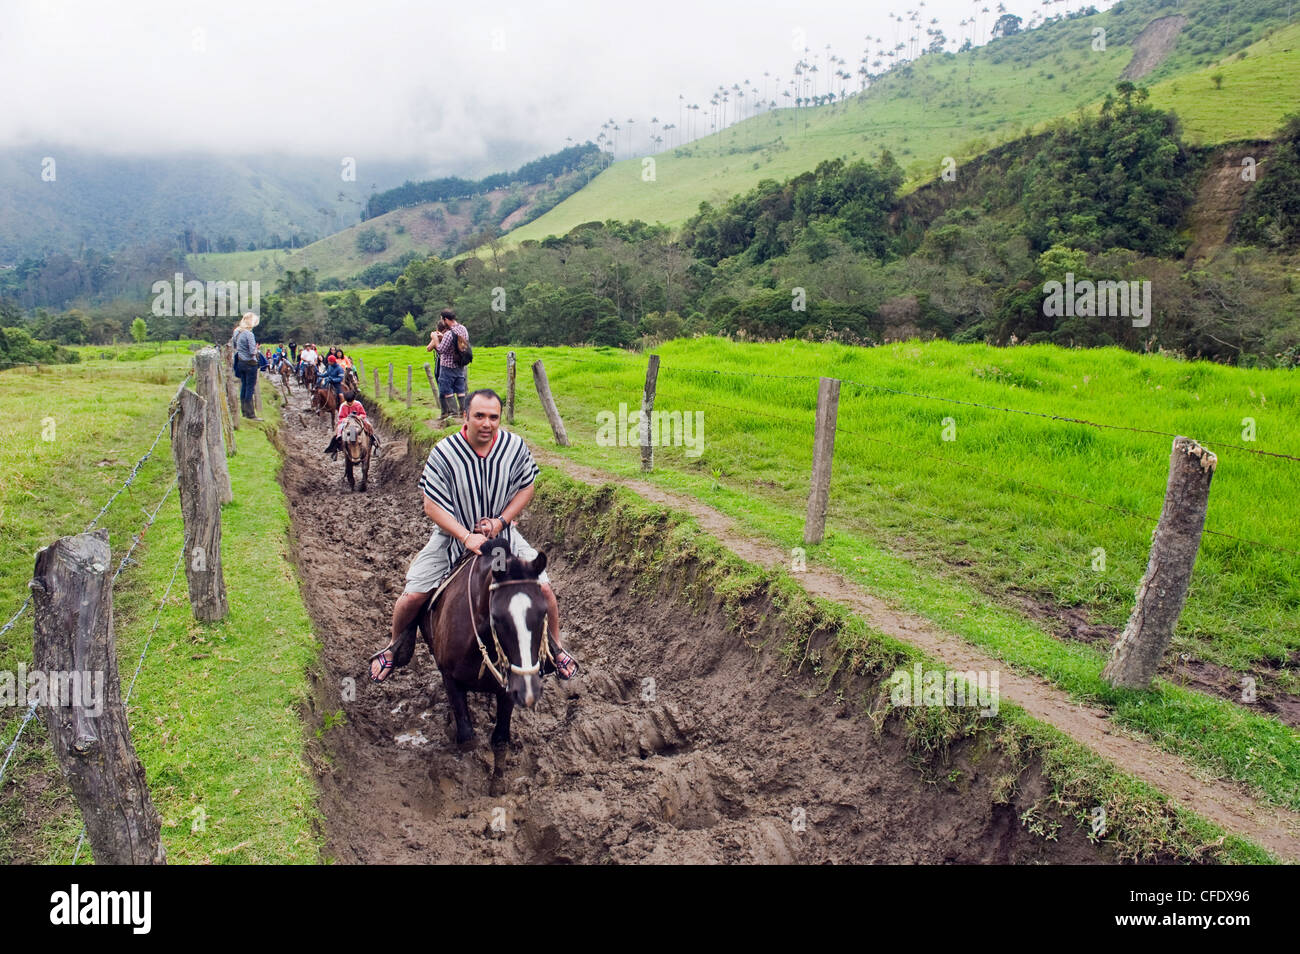 Horse riding in Cocora Valley, Salento, Colombia, South America Stock Photo